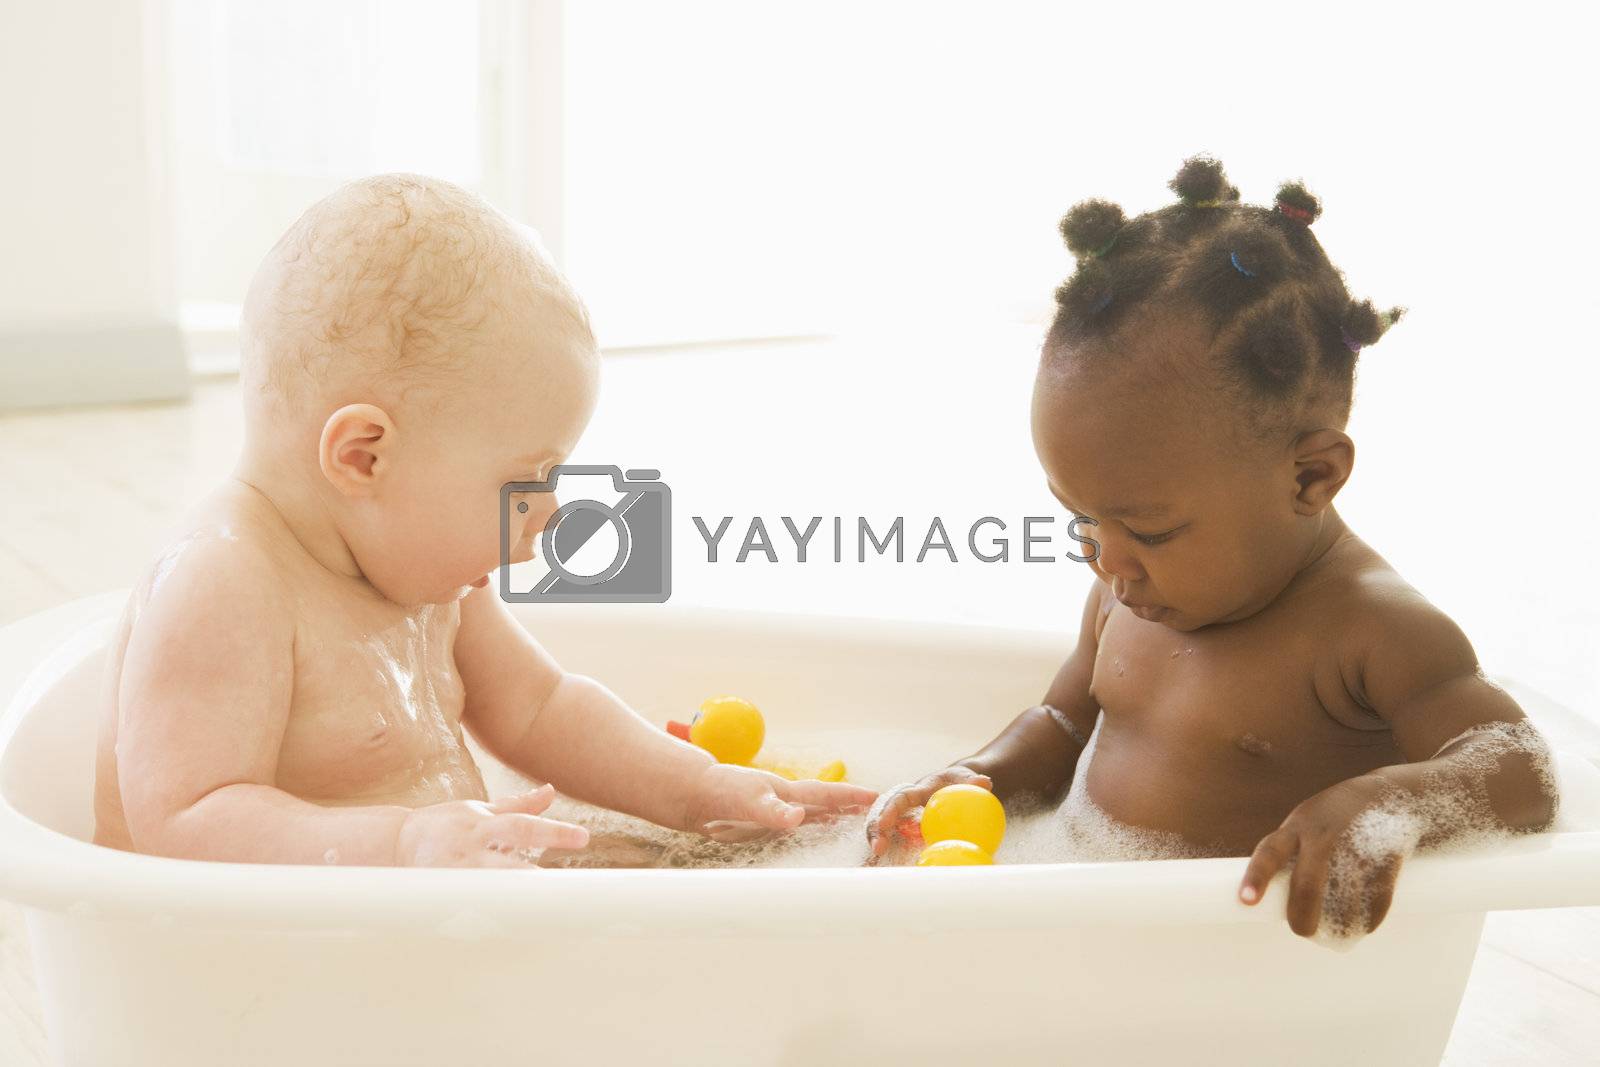 Royalty free image of Two babies in bubble bath by MonkeyBusiness